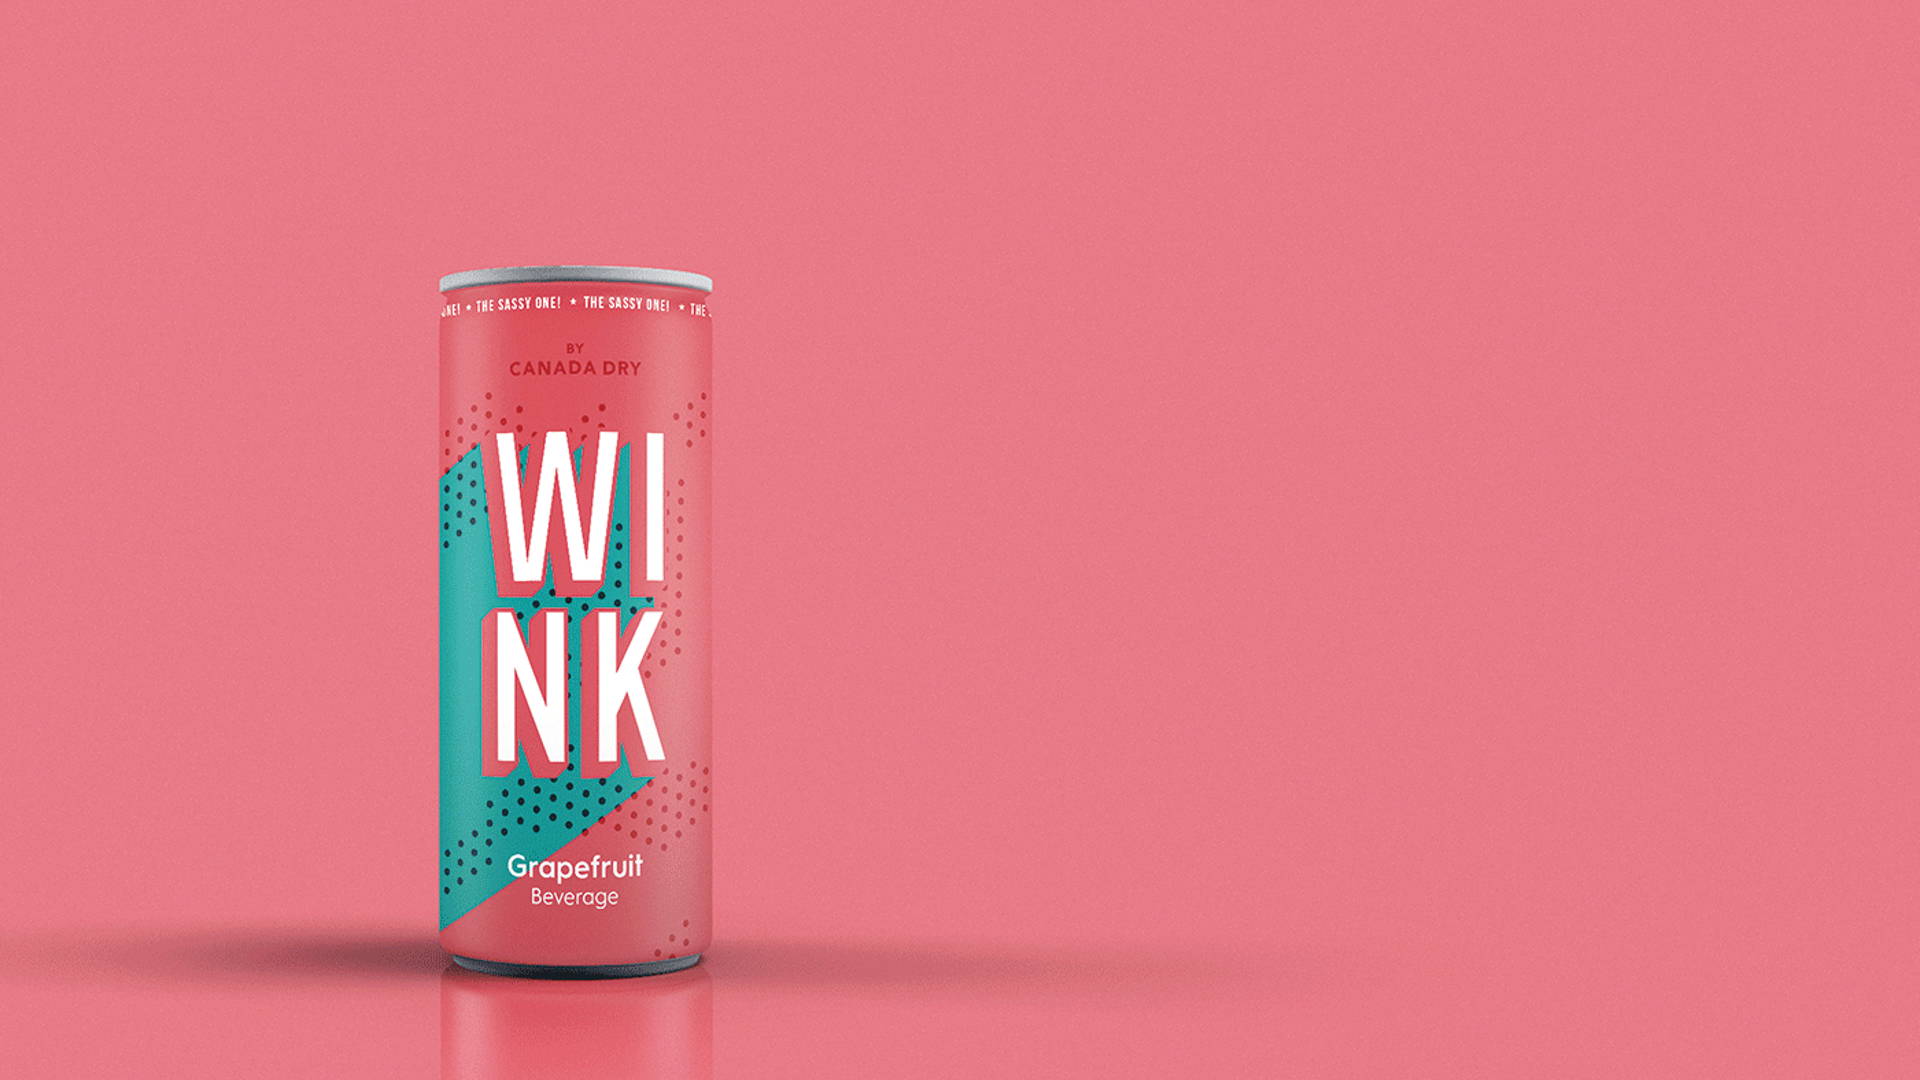 Featured image for This Soda Concept is Fun, Fresh, and Fierce